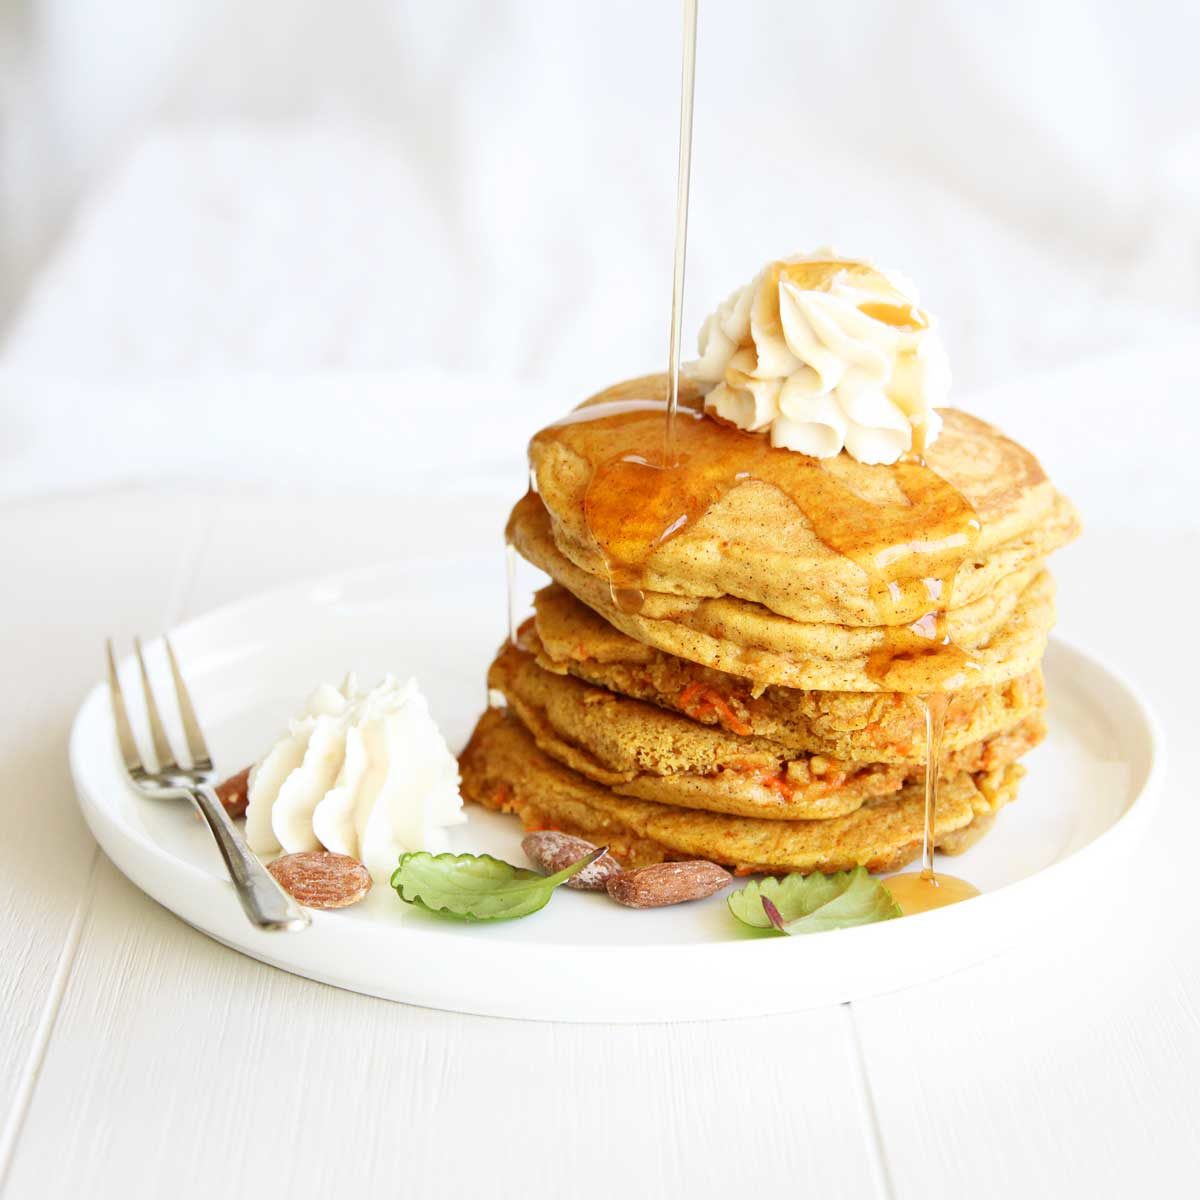 Fluffy Carrot Cake Mochi Pancakes made with Almond Flour